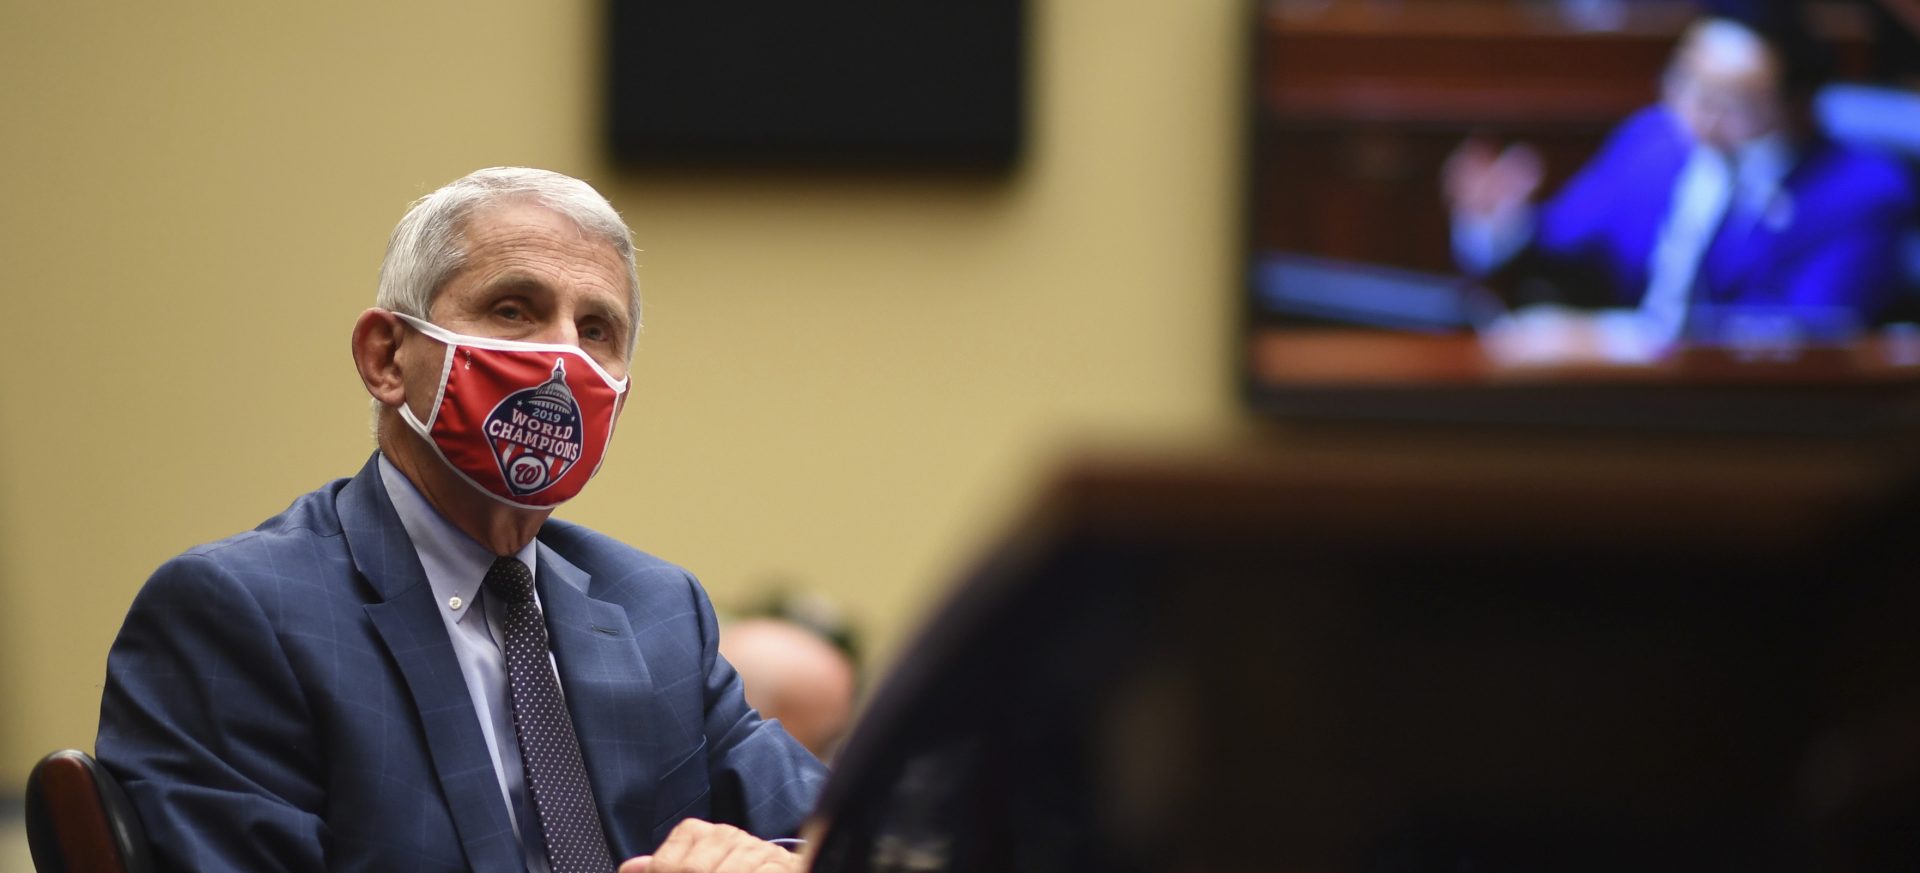 Dr. Anthony Fauci, director of the National Institute for Allergy and Infectious Diseases, listens during a House Subcommittee on the Coronavirus crisis hearing, Friday, July 31, 2020 on Capitol Hill in Washington.